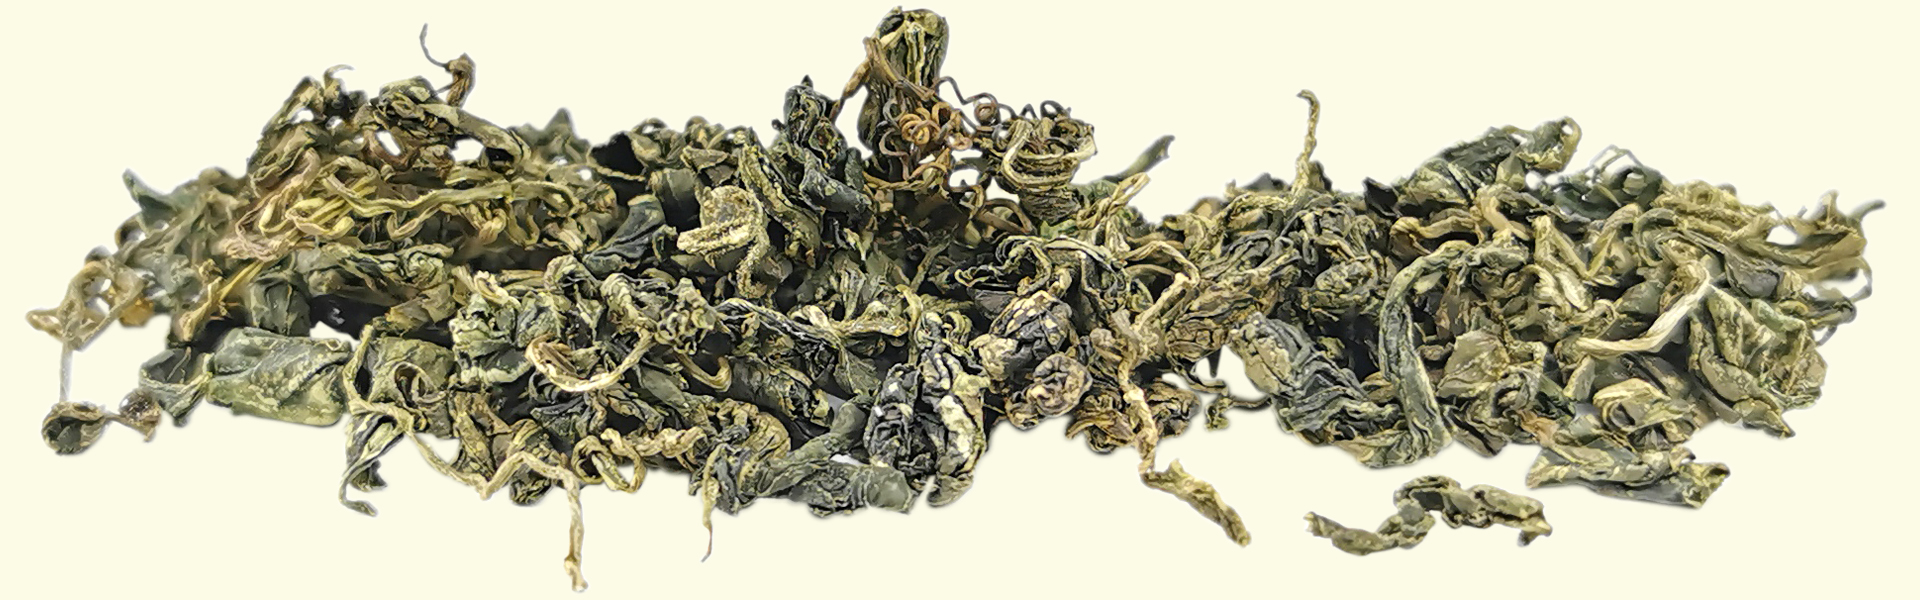 Jiaogulan: cultivated by our tea producer based in northern Thailand, Jiaogulan infusion is gentle, relaxing & helps strengthen the long-term immune system.